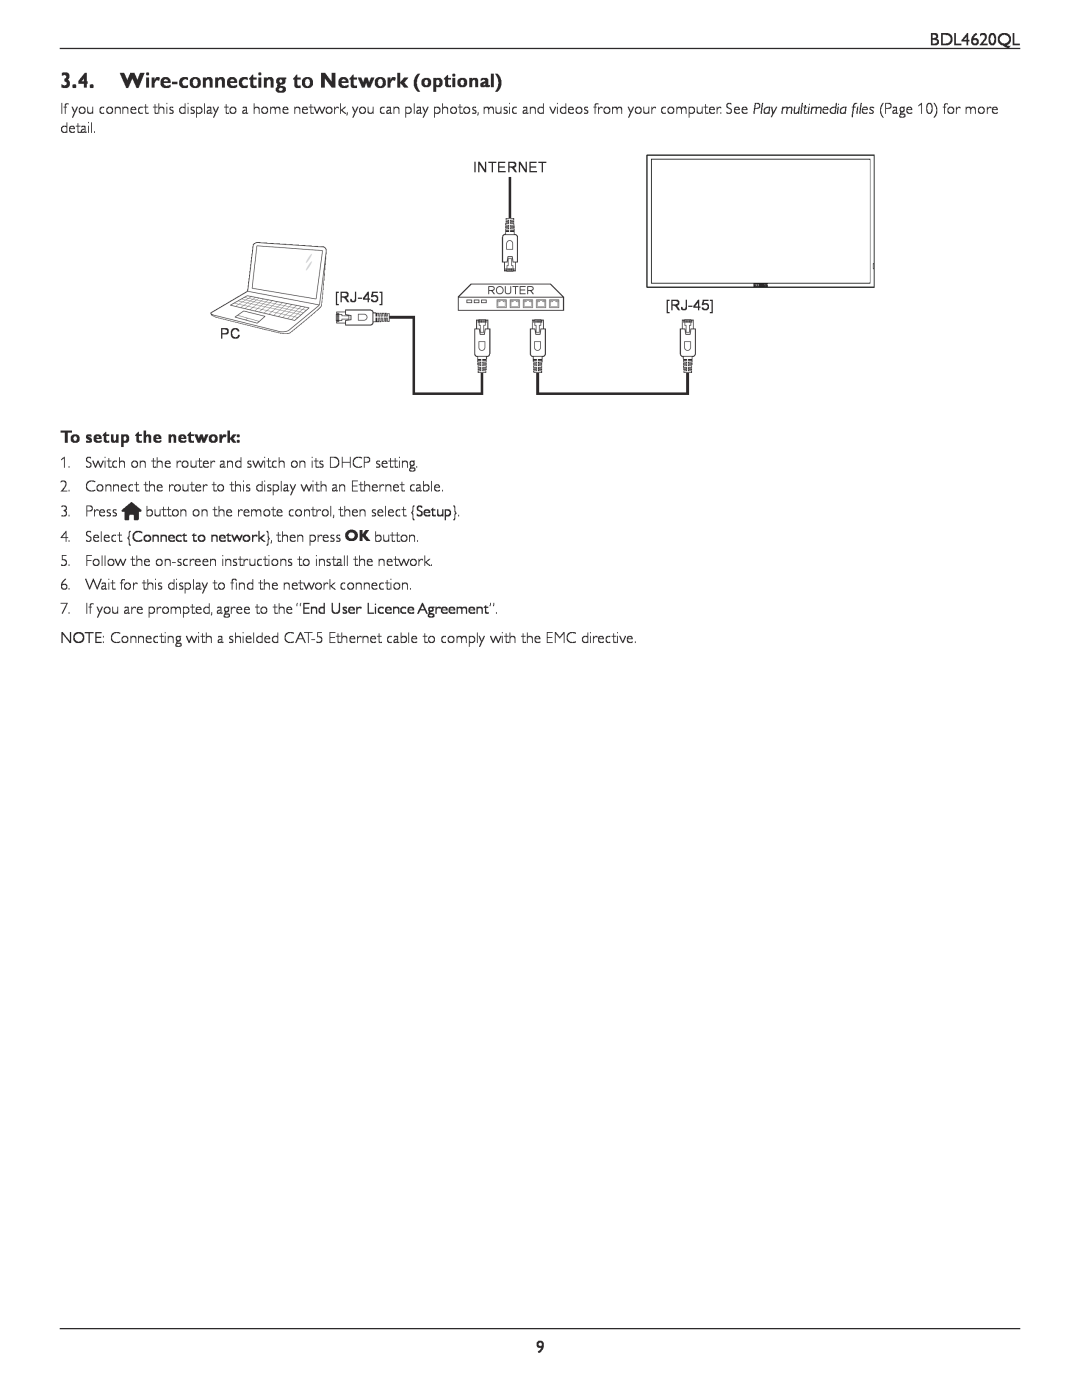 Philips BDL4620QL user manual Wire-connecting to Network optional, To setup the network 